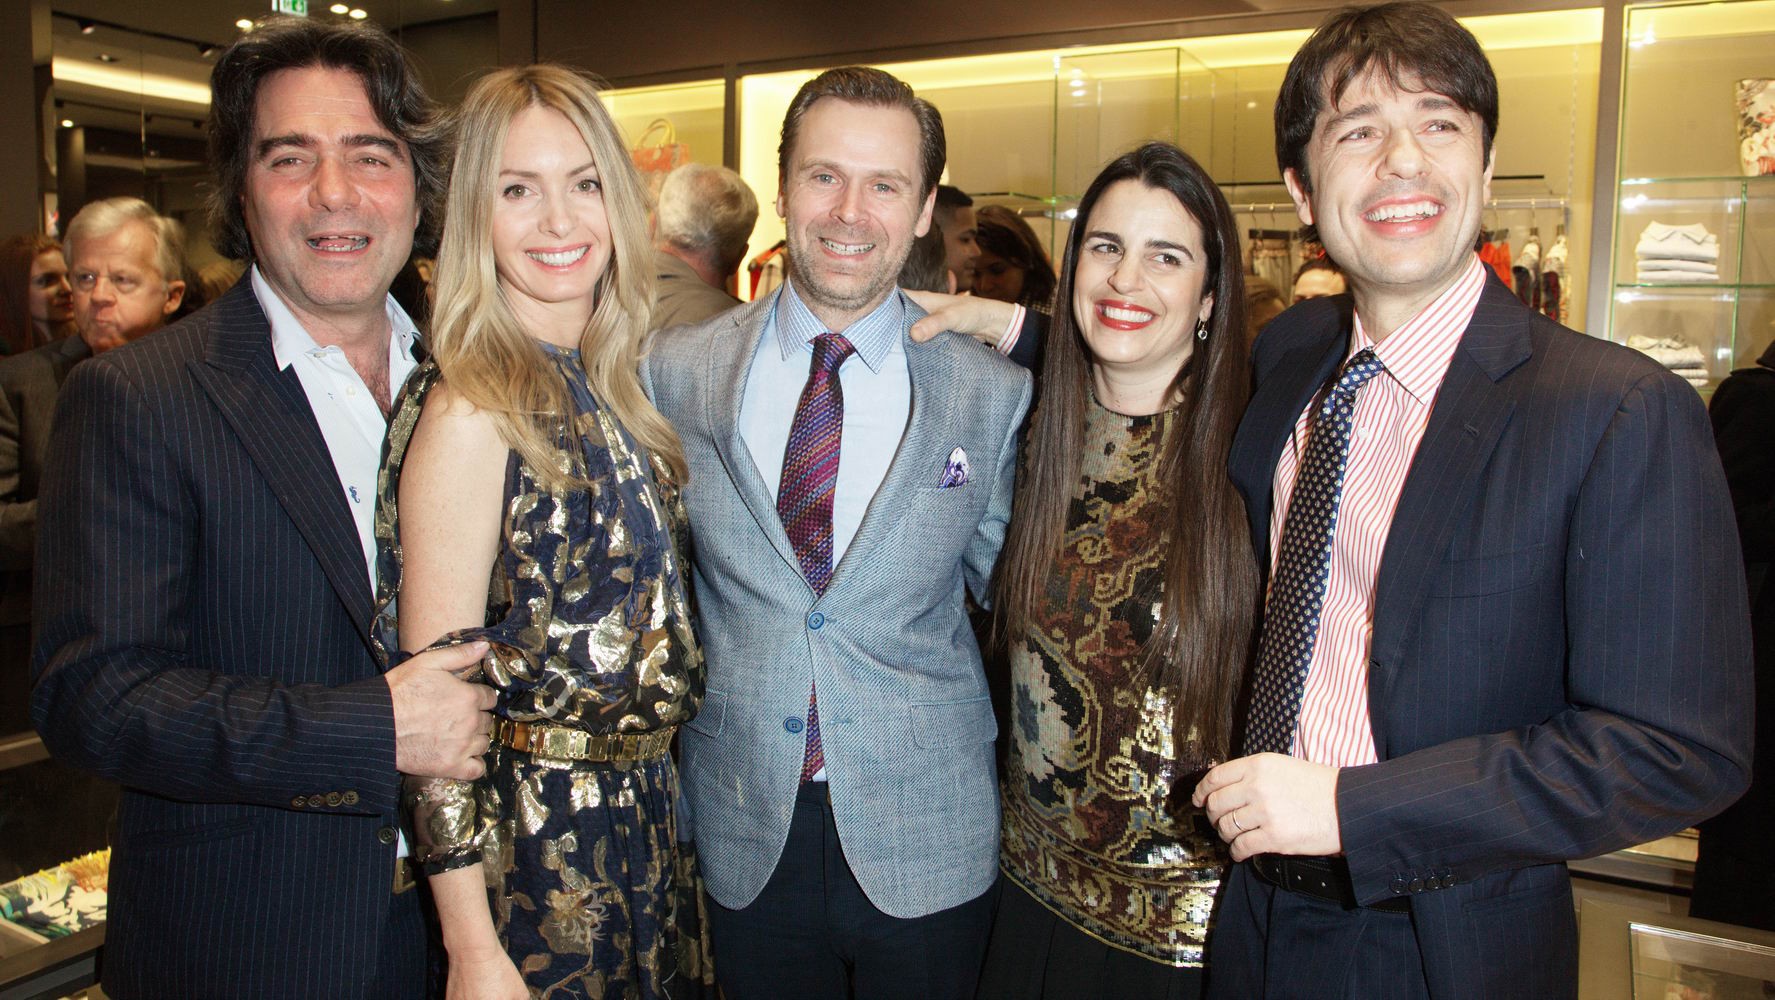 Etro Storeopening im Quartier 206 / Berlin  by Gregor Anthes